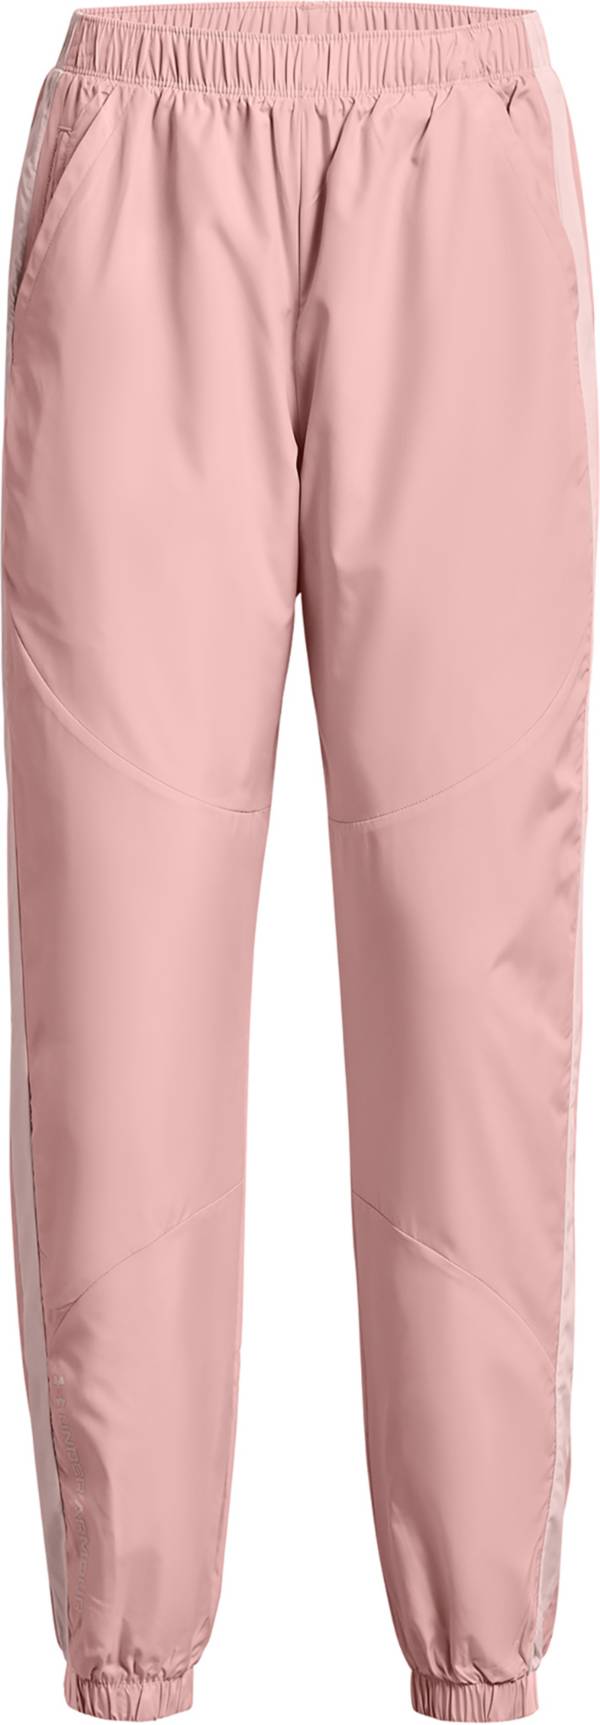 Under Armour Women's Rush Woven Pants product image